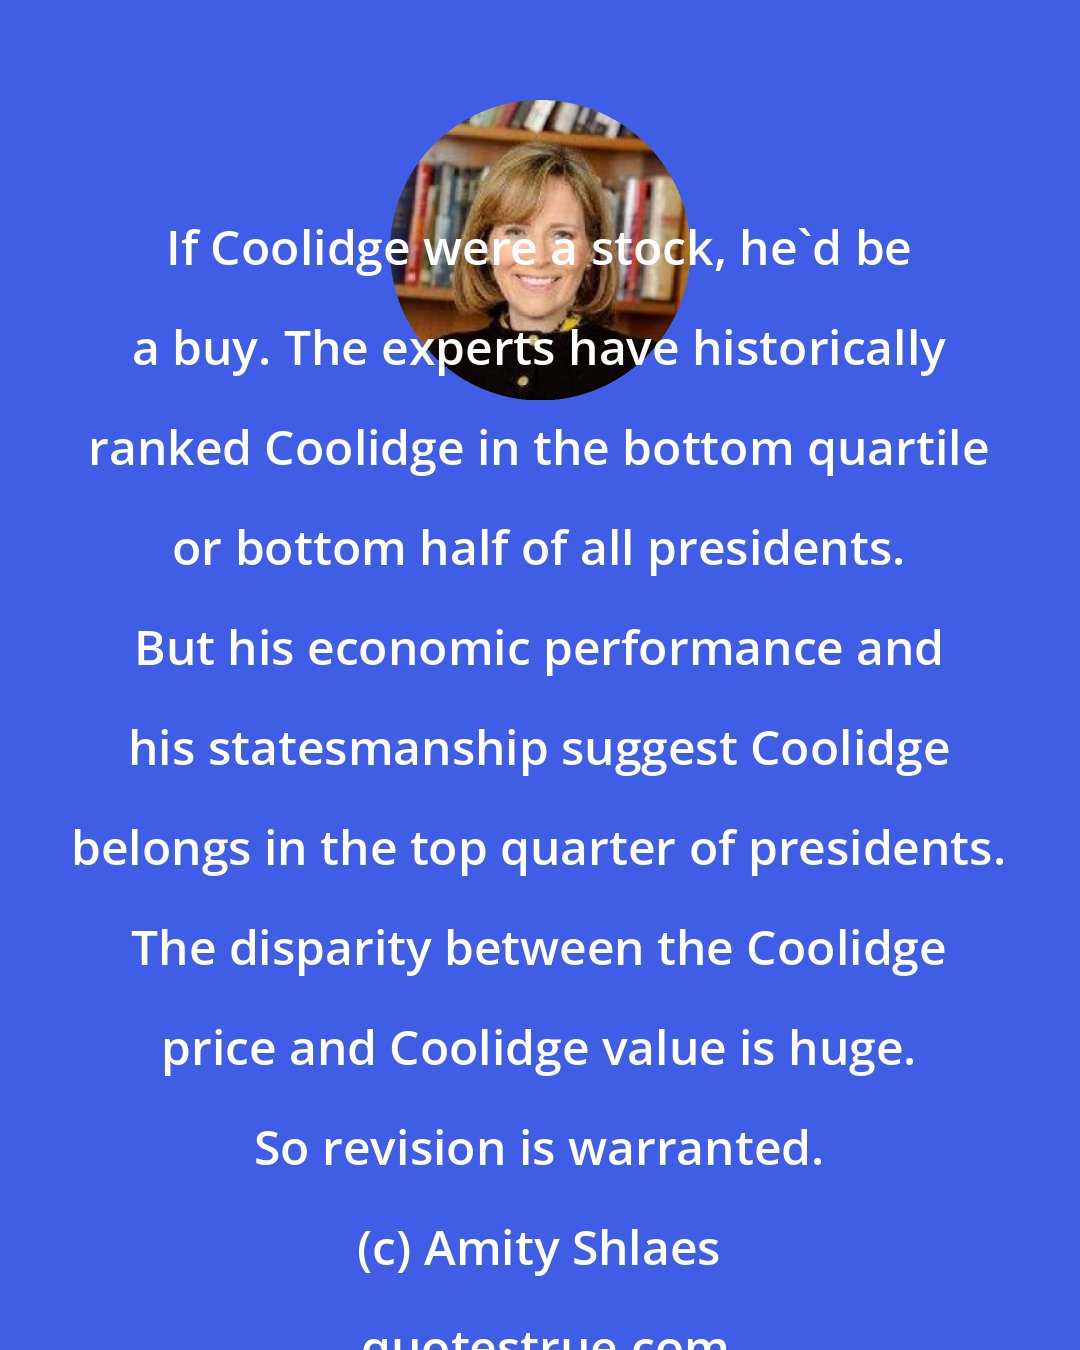 Amity Shlaes: If Coolidge were a stock, he'd be a buy. The experts have historically ranked Coolidge in the bottom quartile or bottom half of all presidents. But his economic performance and his statesmanship suggest Coolidge belongs in the top quarter of presidents. The disparity between the Coolidge price and Coolidge value is huge. So revision is warranted.